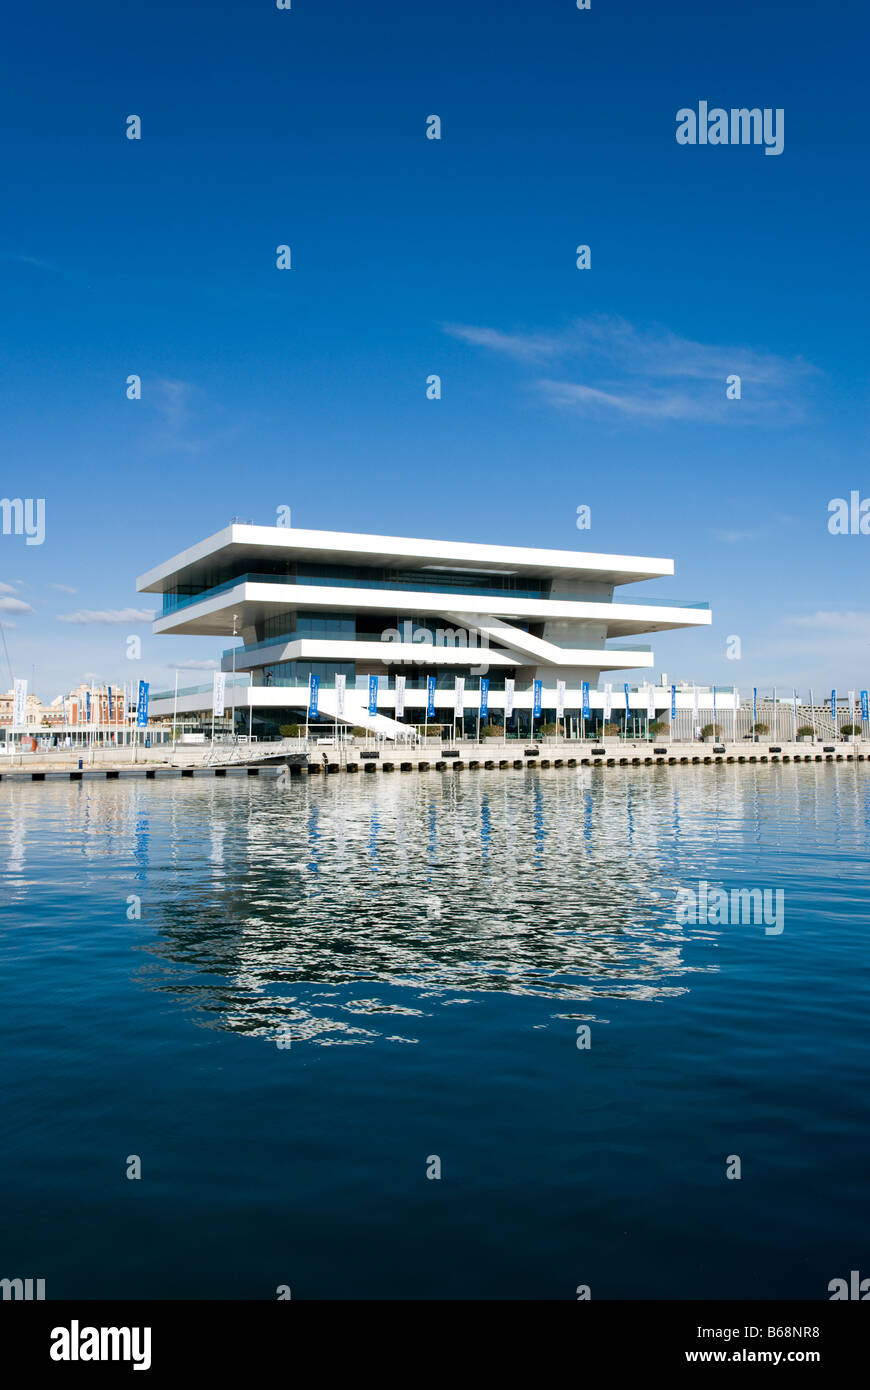 America s Cup Pavilion Veles e Vents or Sails Winds in the port of Valencia designed by David Chipperfield architects Stock Photo